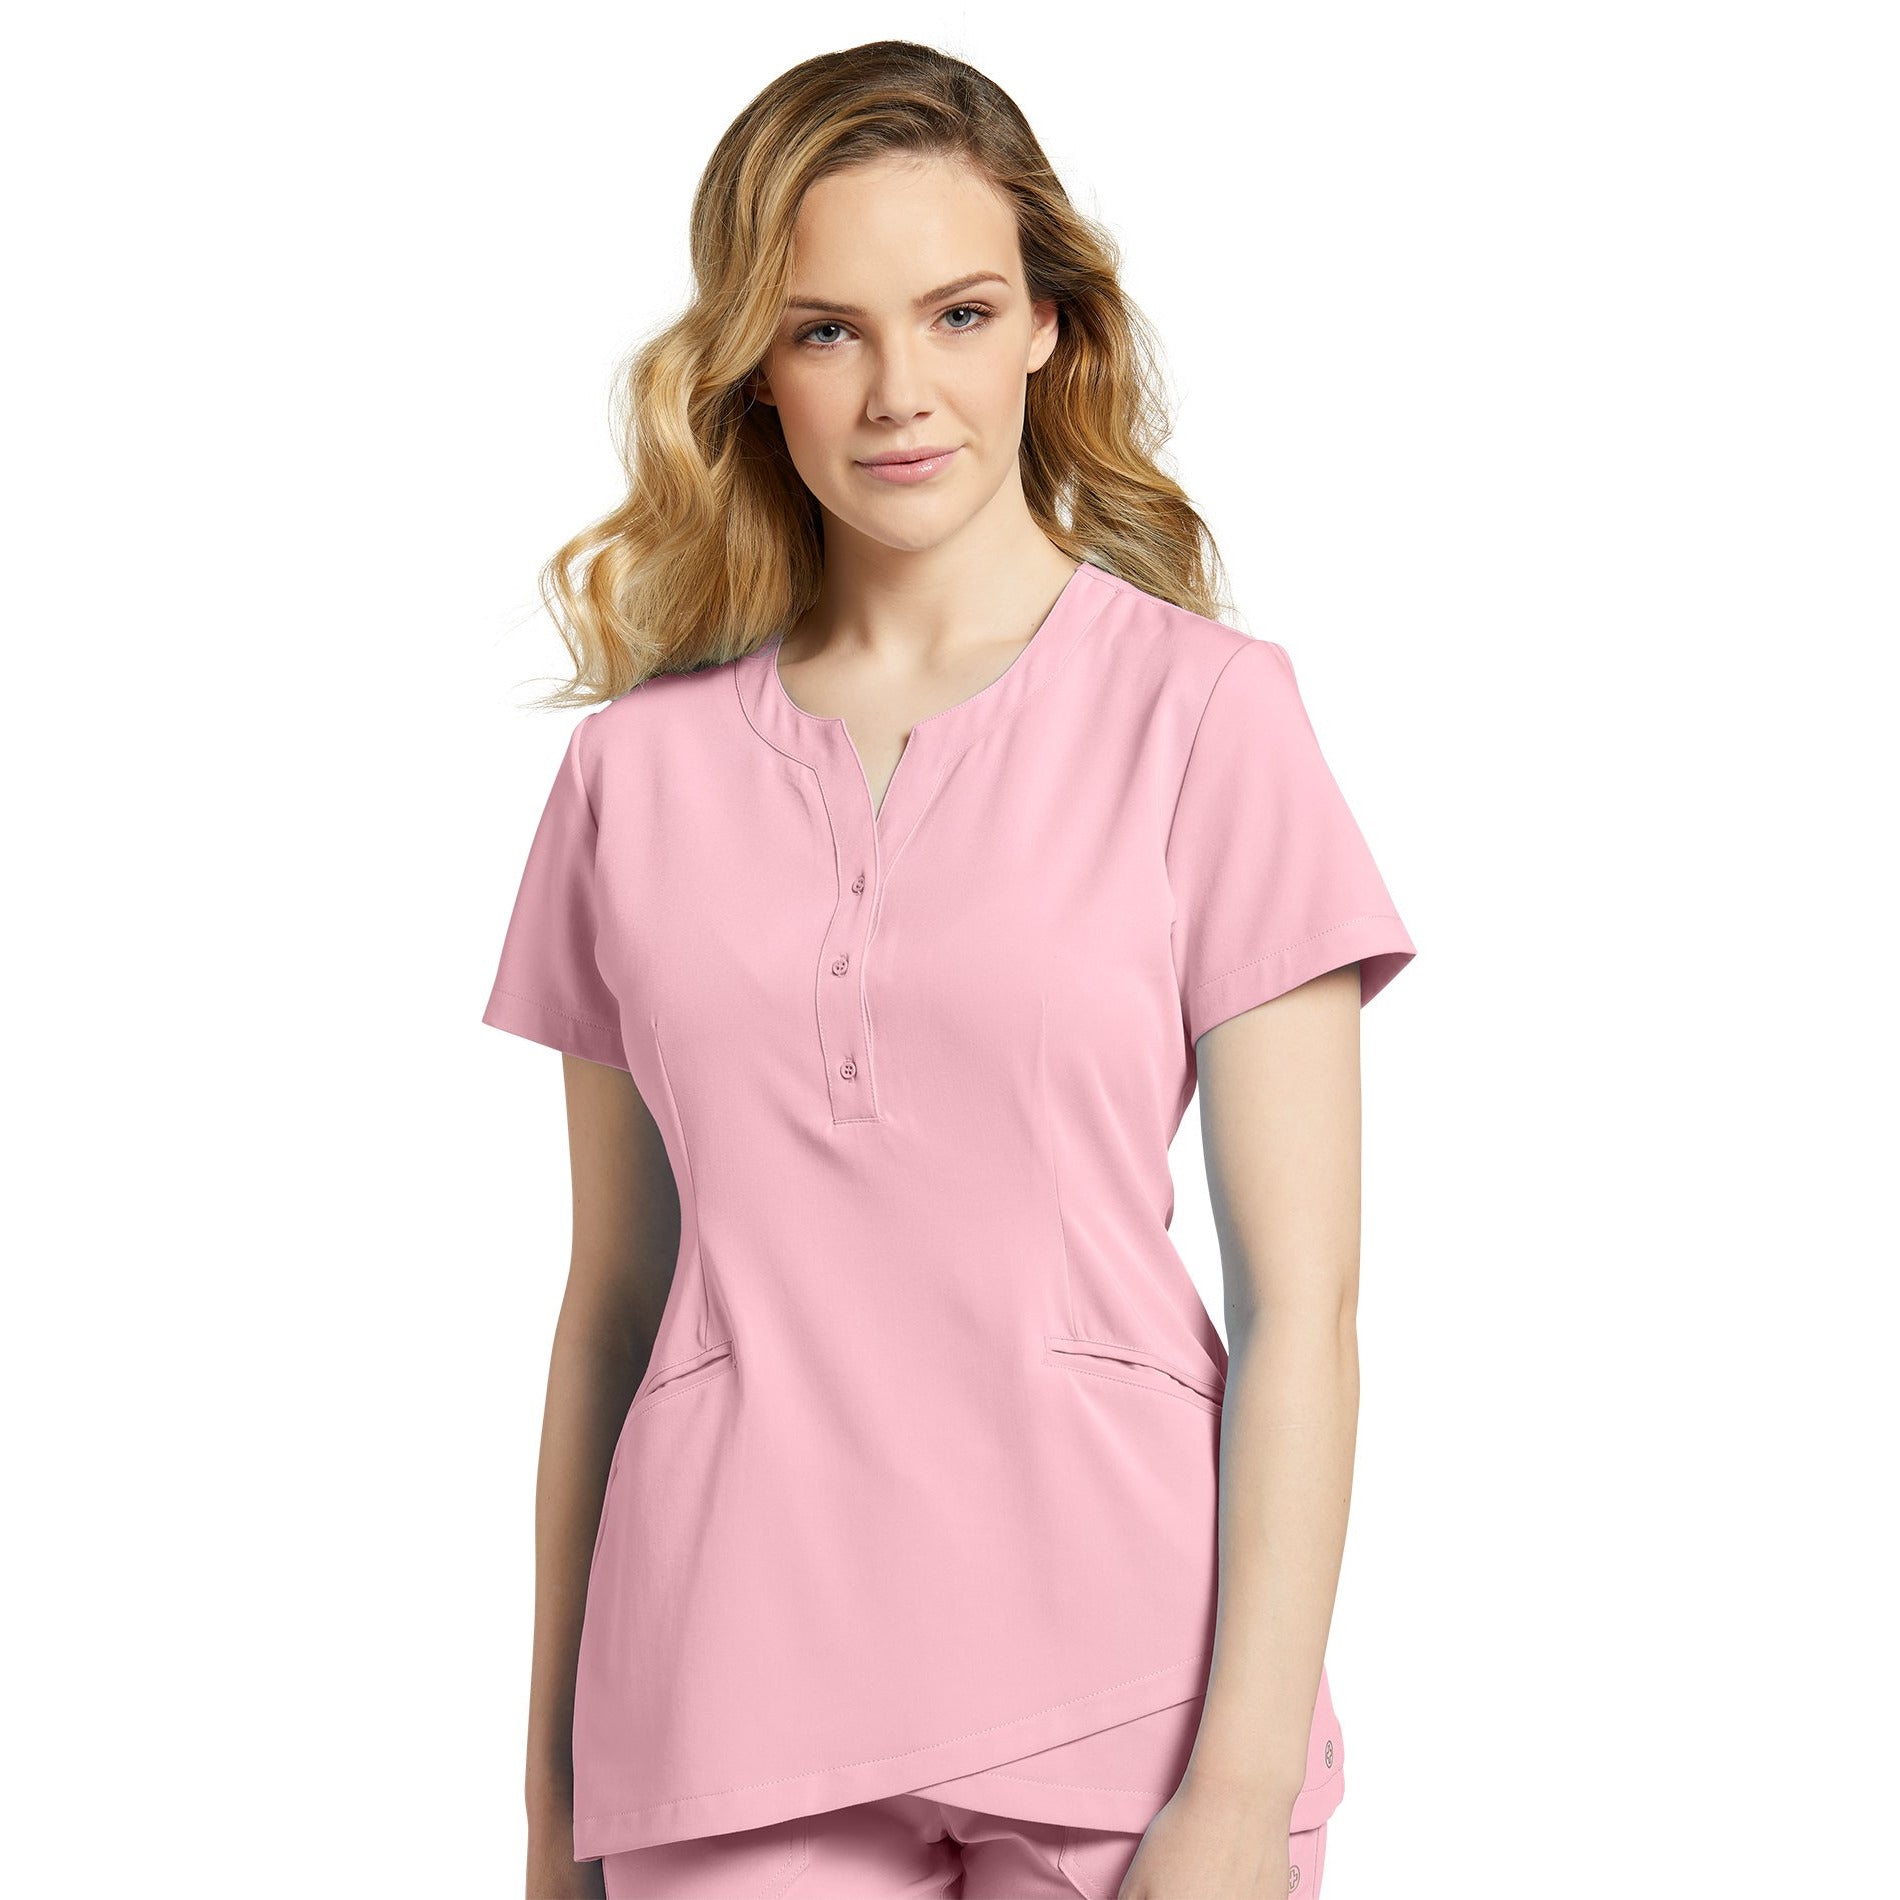 Scrub Top by Marvella Very Soft with front buttons (784) SALE